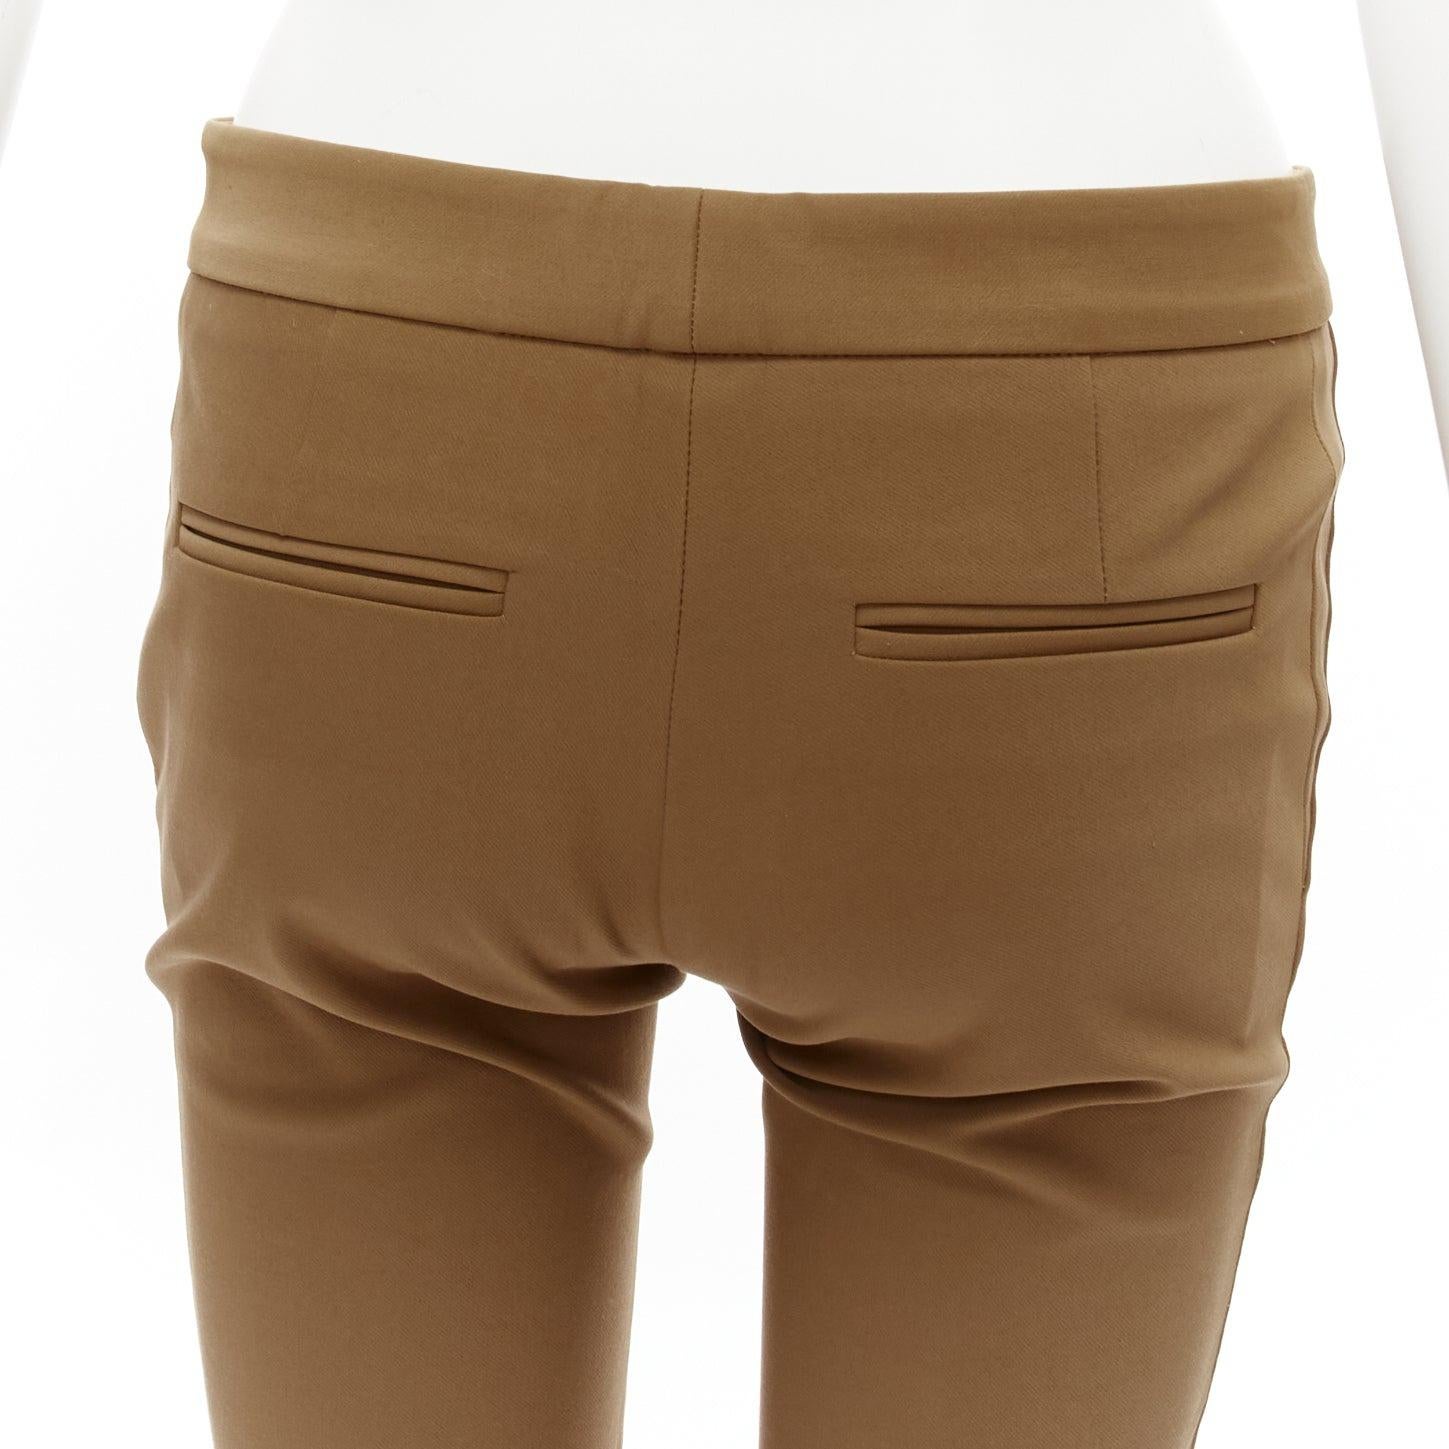 STELLA MCCARTNEY tan brown cotton blend stretchy cropped pants IT38 XS
Reference: LNKO/A02241
Brand: Stella McCartney
Designer: Stella McCartney
Material: Cotton, Blend
Color: Tan Brown
Pattern: Solid
Closure: Zip Fly
Made in: